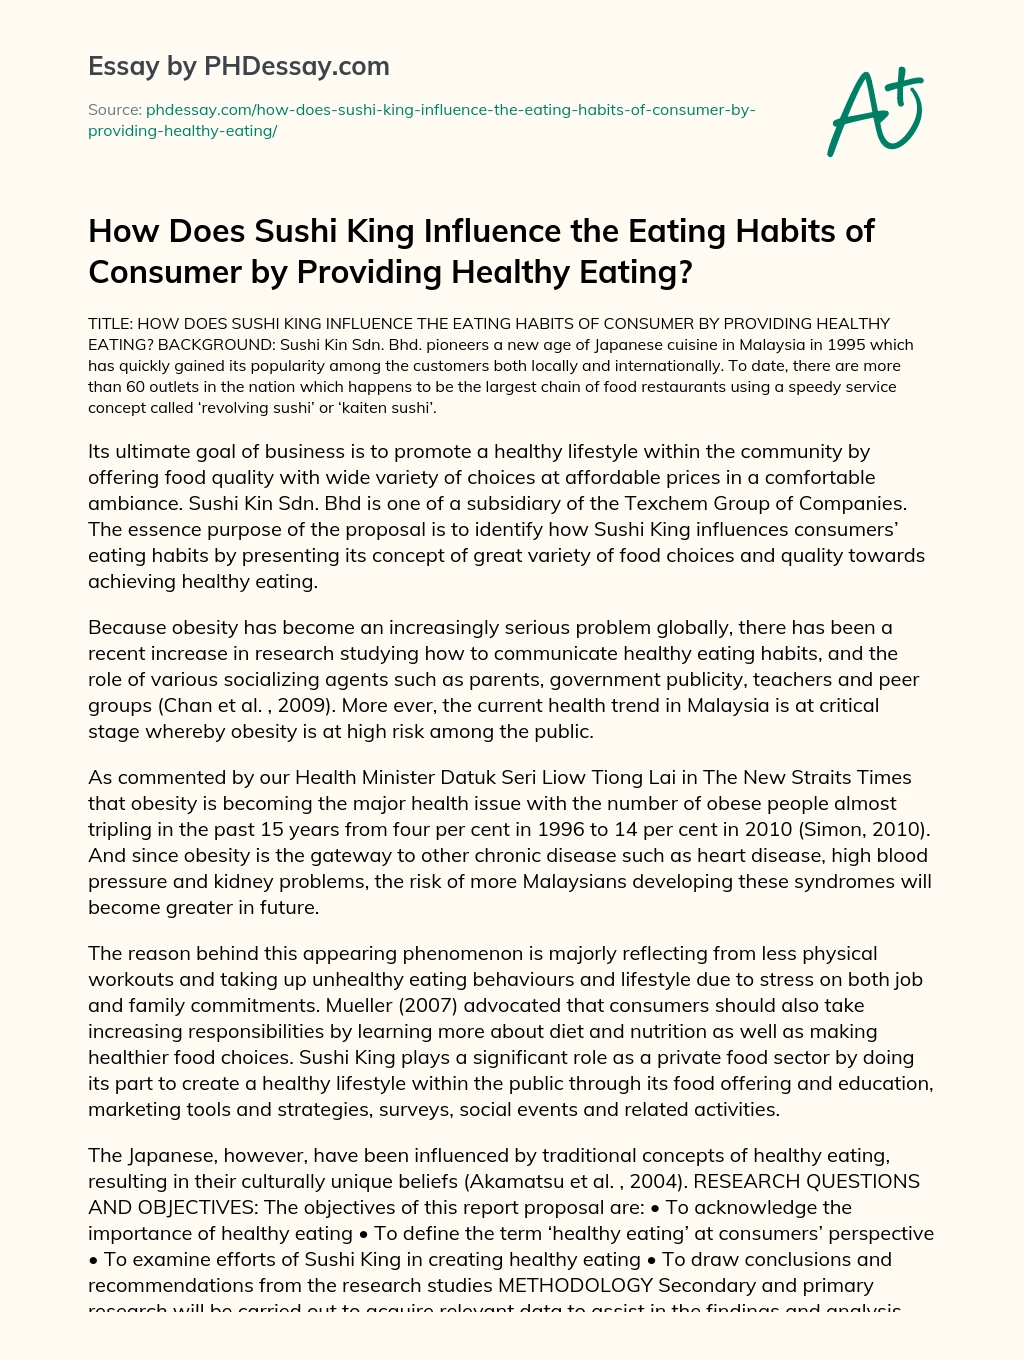 How Does Sushi King Influence the Eating Habits of Consumer by Providing Healthy Eating? essay